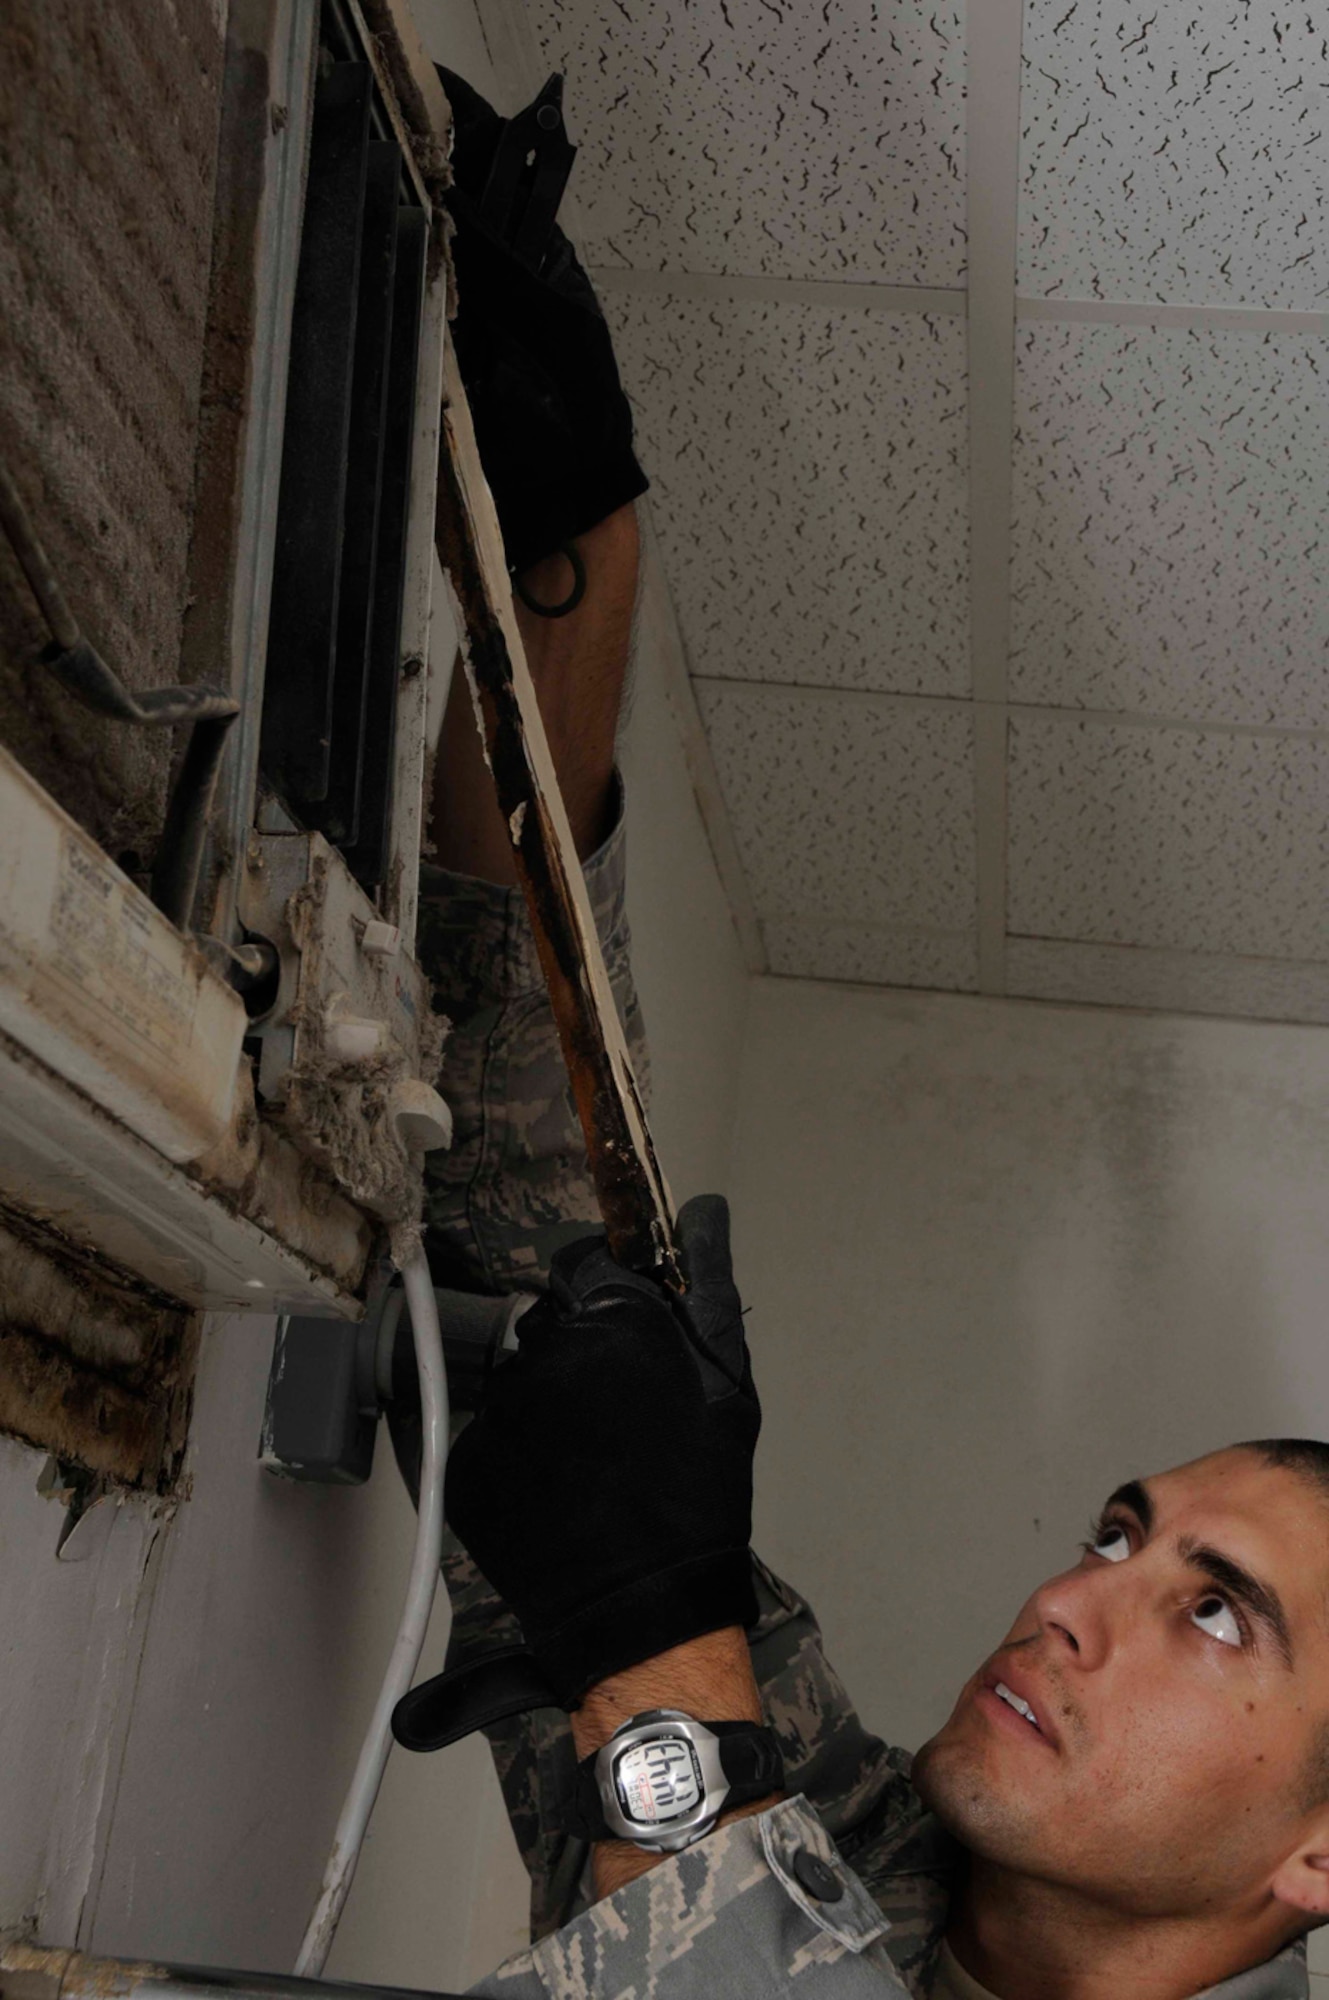 Staff Sgt. Cesar Alvarado, 379th Expeditionary Civil Engineer Squadron, removes the trim around an inoperable air conditioning unit in a cadillac July 30 in Southwest Asia. Cadillacs are bathroom facilities for deployed military members and its Sergeant Alvarado’s job to perform daily maintenance on it. Sergeant Alvarado is a structural journeyman deployed from Eglin Air Force Base, Fla. (U.S. Photo/Staff Sgt. Darnell T. Cannady)